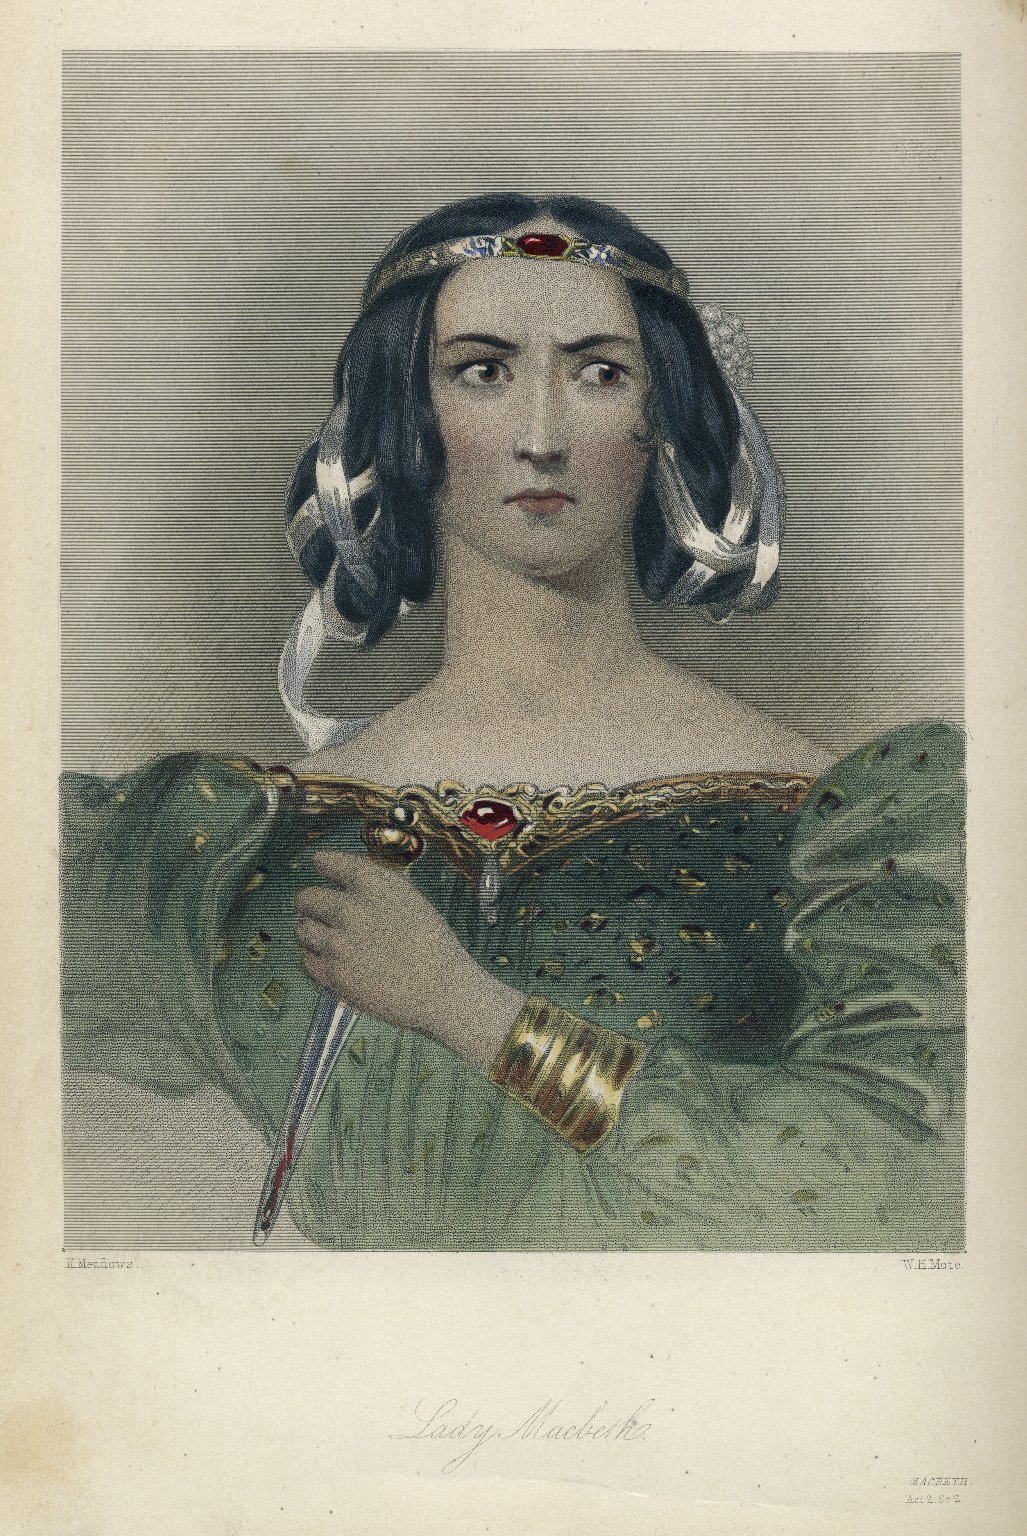 A print of Lady Macbeth from Mrs. Anna Jameson's 1832 analysis of Shakespeare's Heroines, Characteristics of Women. Author: Kenny Meadows. olger Shakespeare Library Digital Image Collection